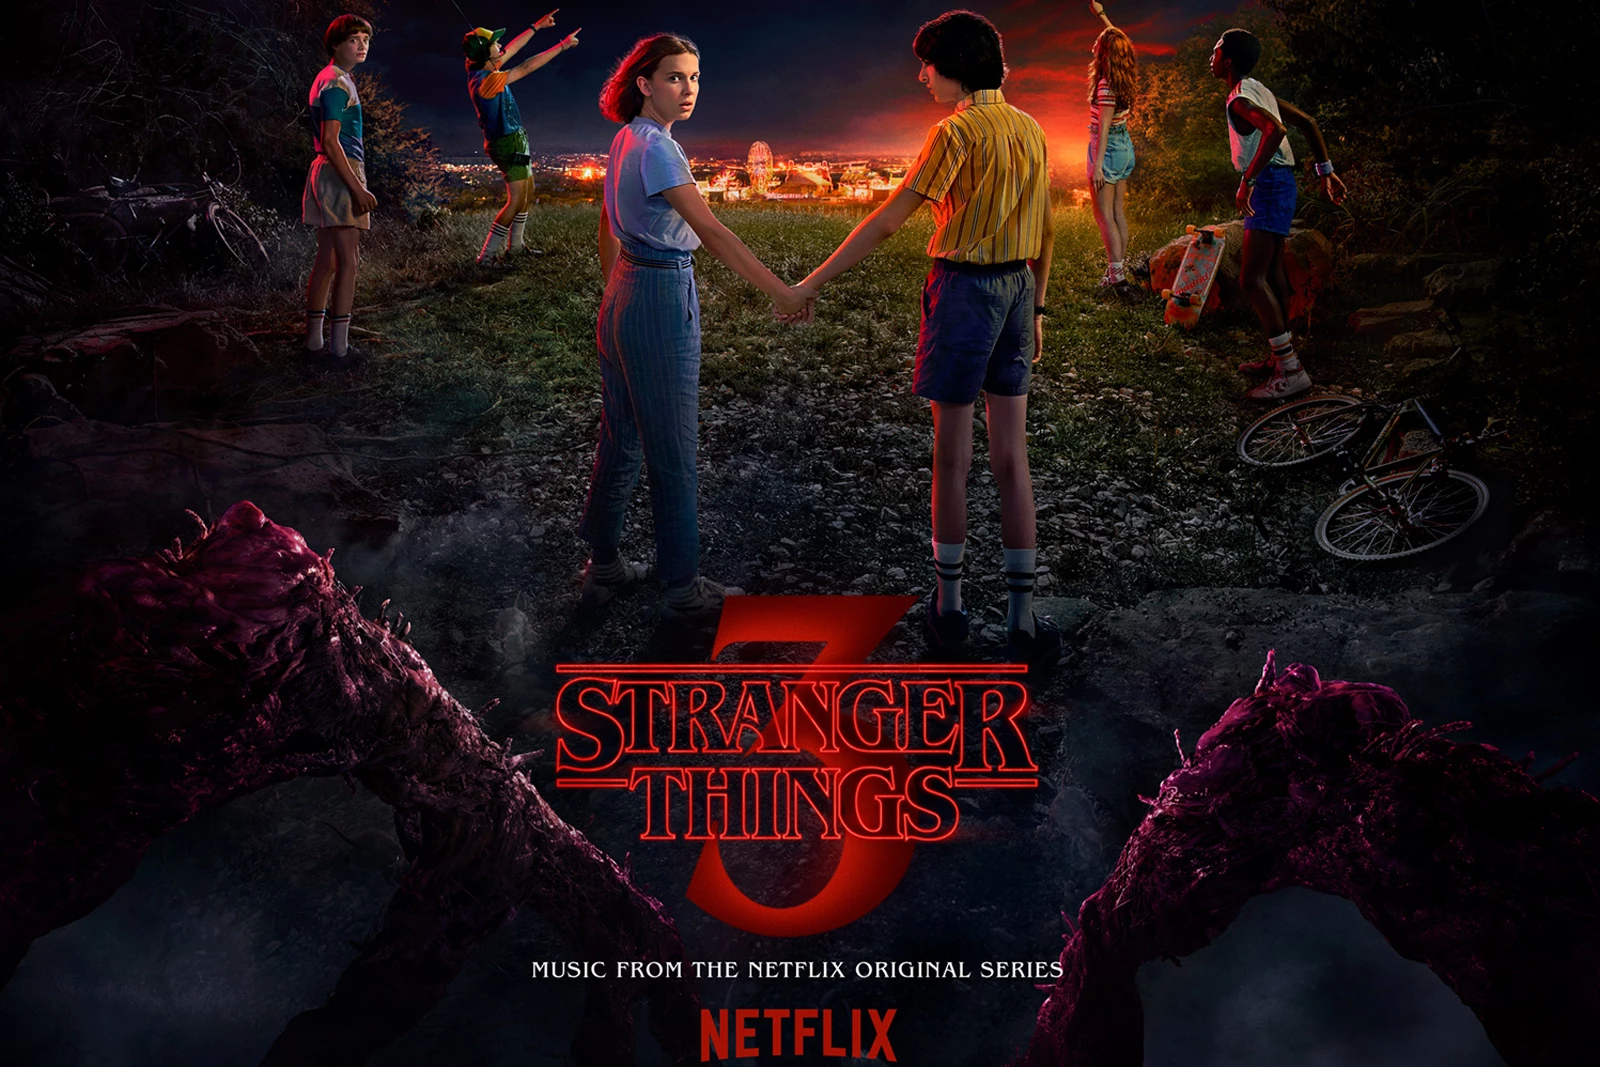 Stranger Things Season 3 Soundtrack Features Cars Who More